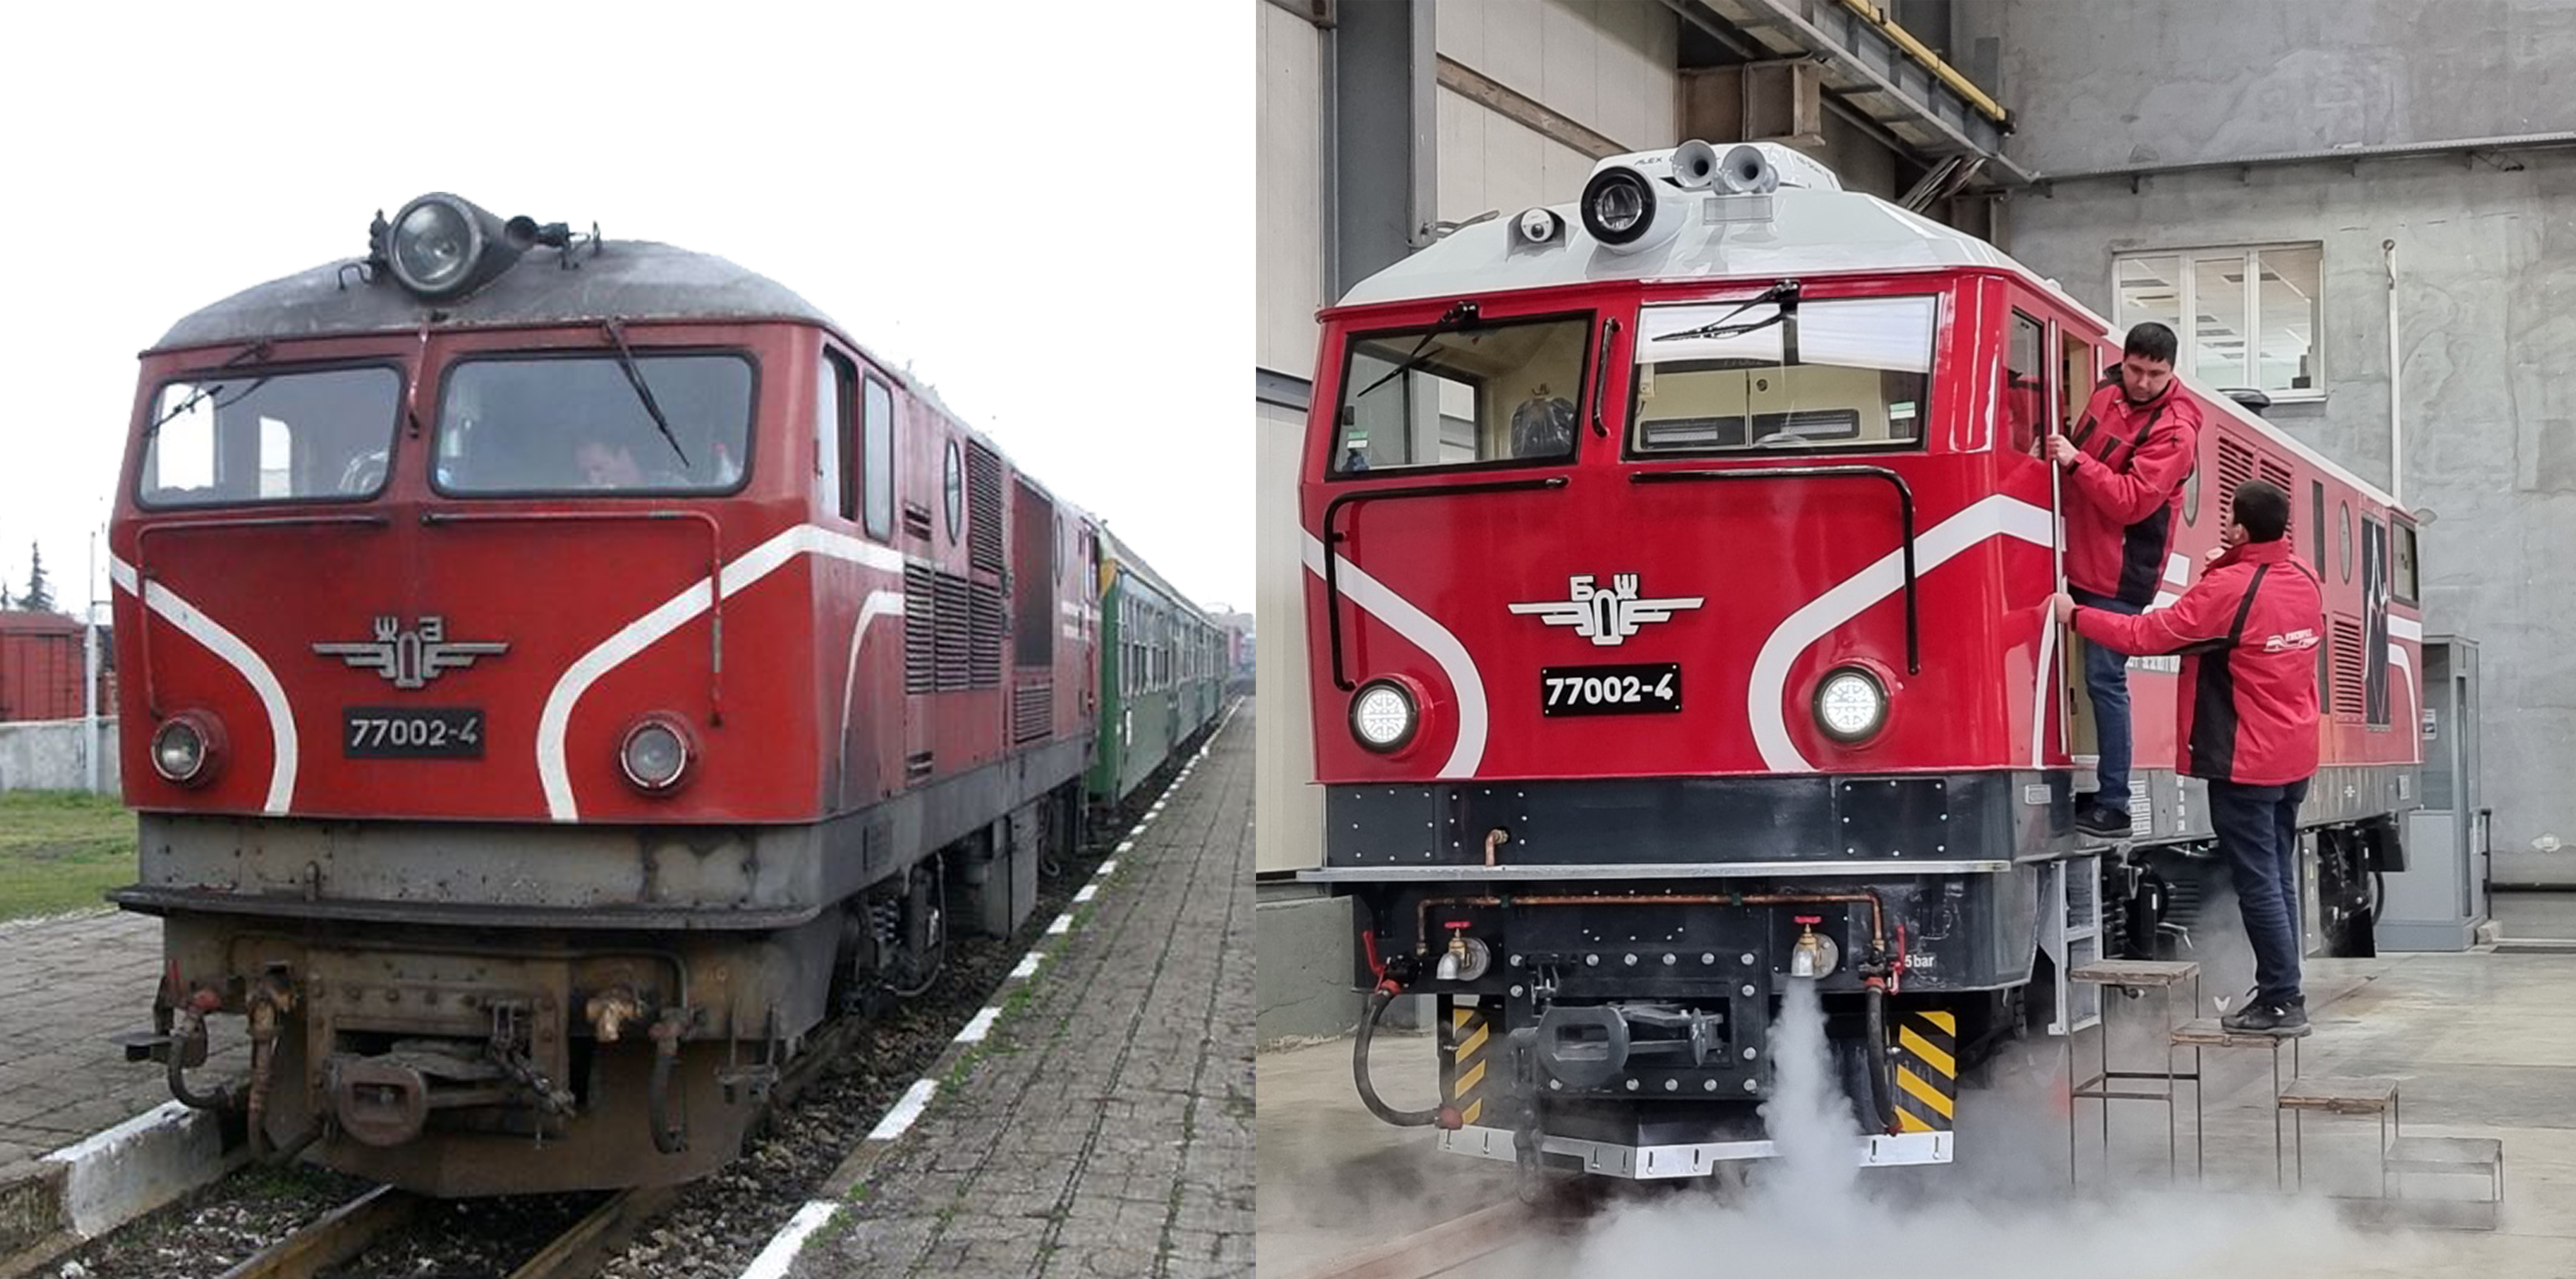 The 77 series diesel locomotive before (left) and after (right) overhauling by Express Service